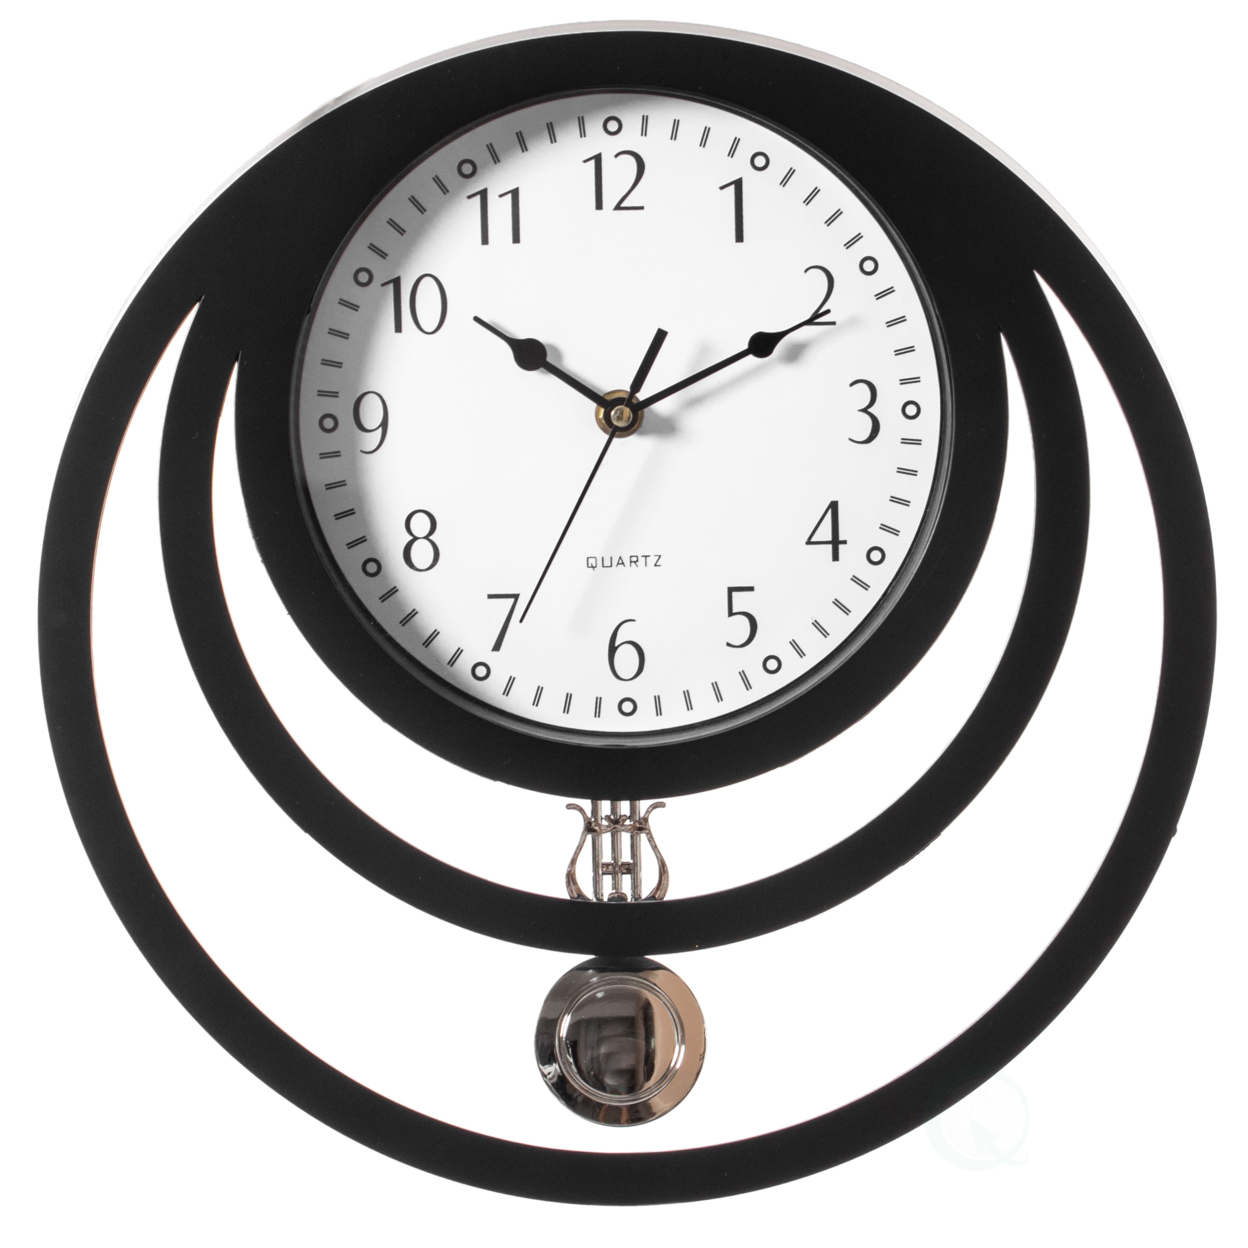 Decorative Modern Unique Round Plastic Wall Clock With Circles, For Living Room, Kitchen, Or Dining Room - Black